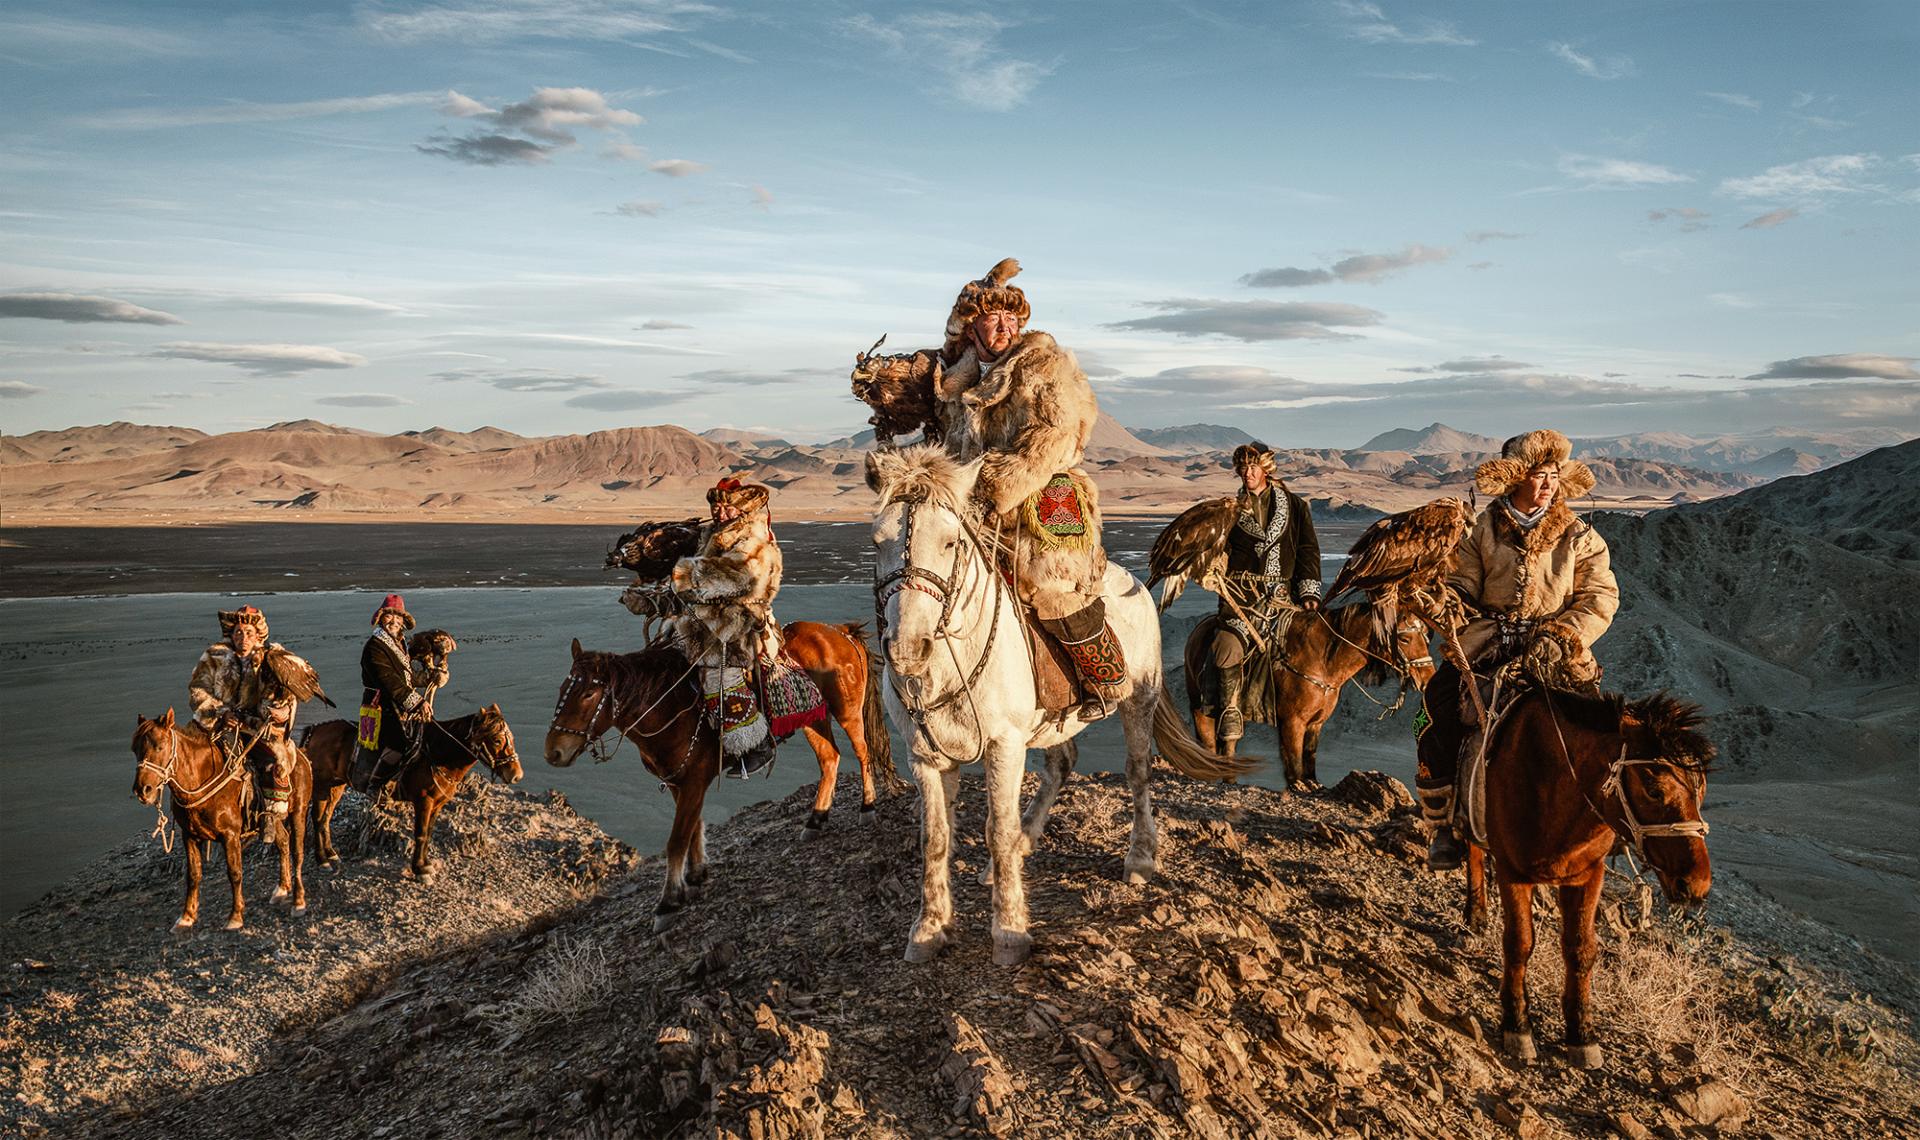 European Photography Awards Winner - Reign of the Eagle Hunters